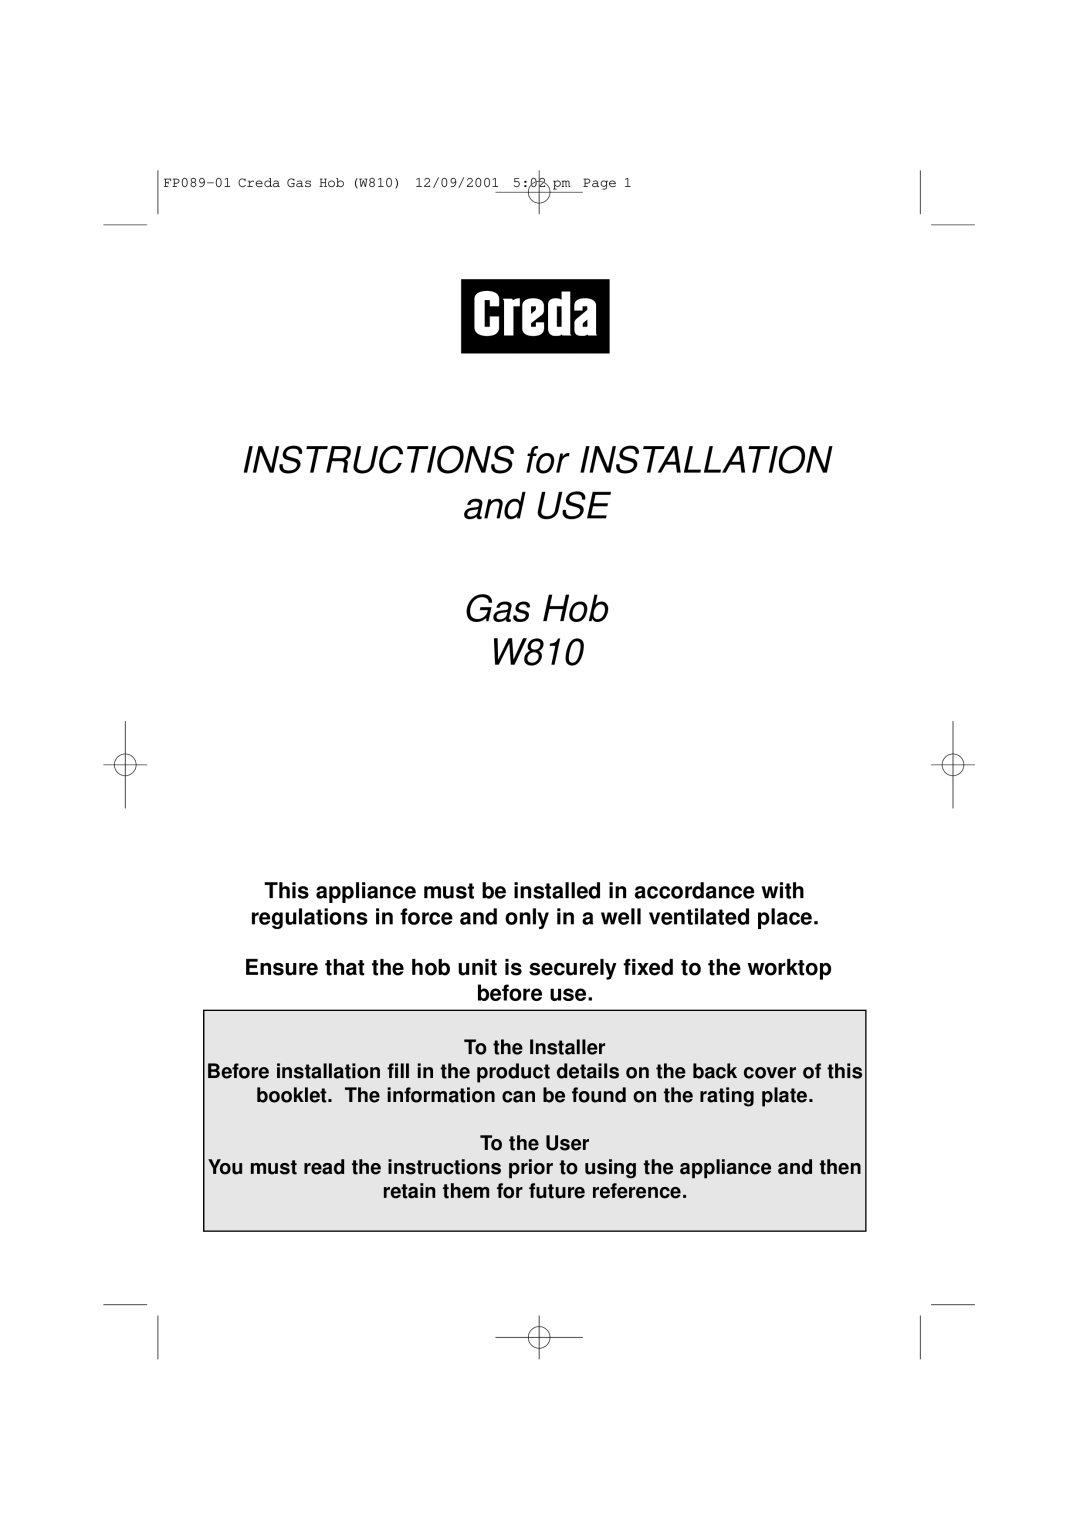 Creda W810 manual Ensure that the hob unit is securely fixed to the worktop before use, To the Installer 